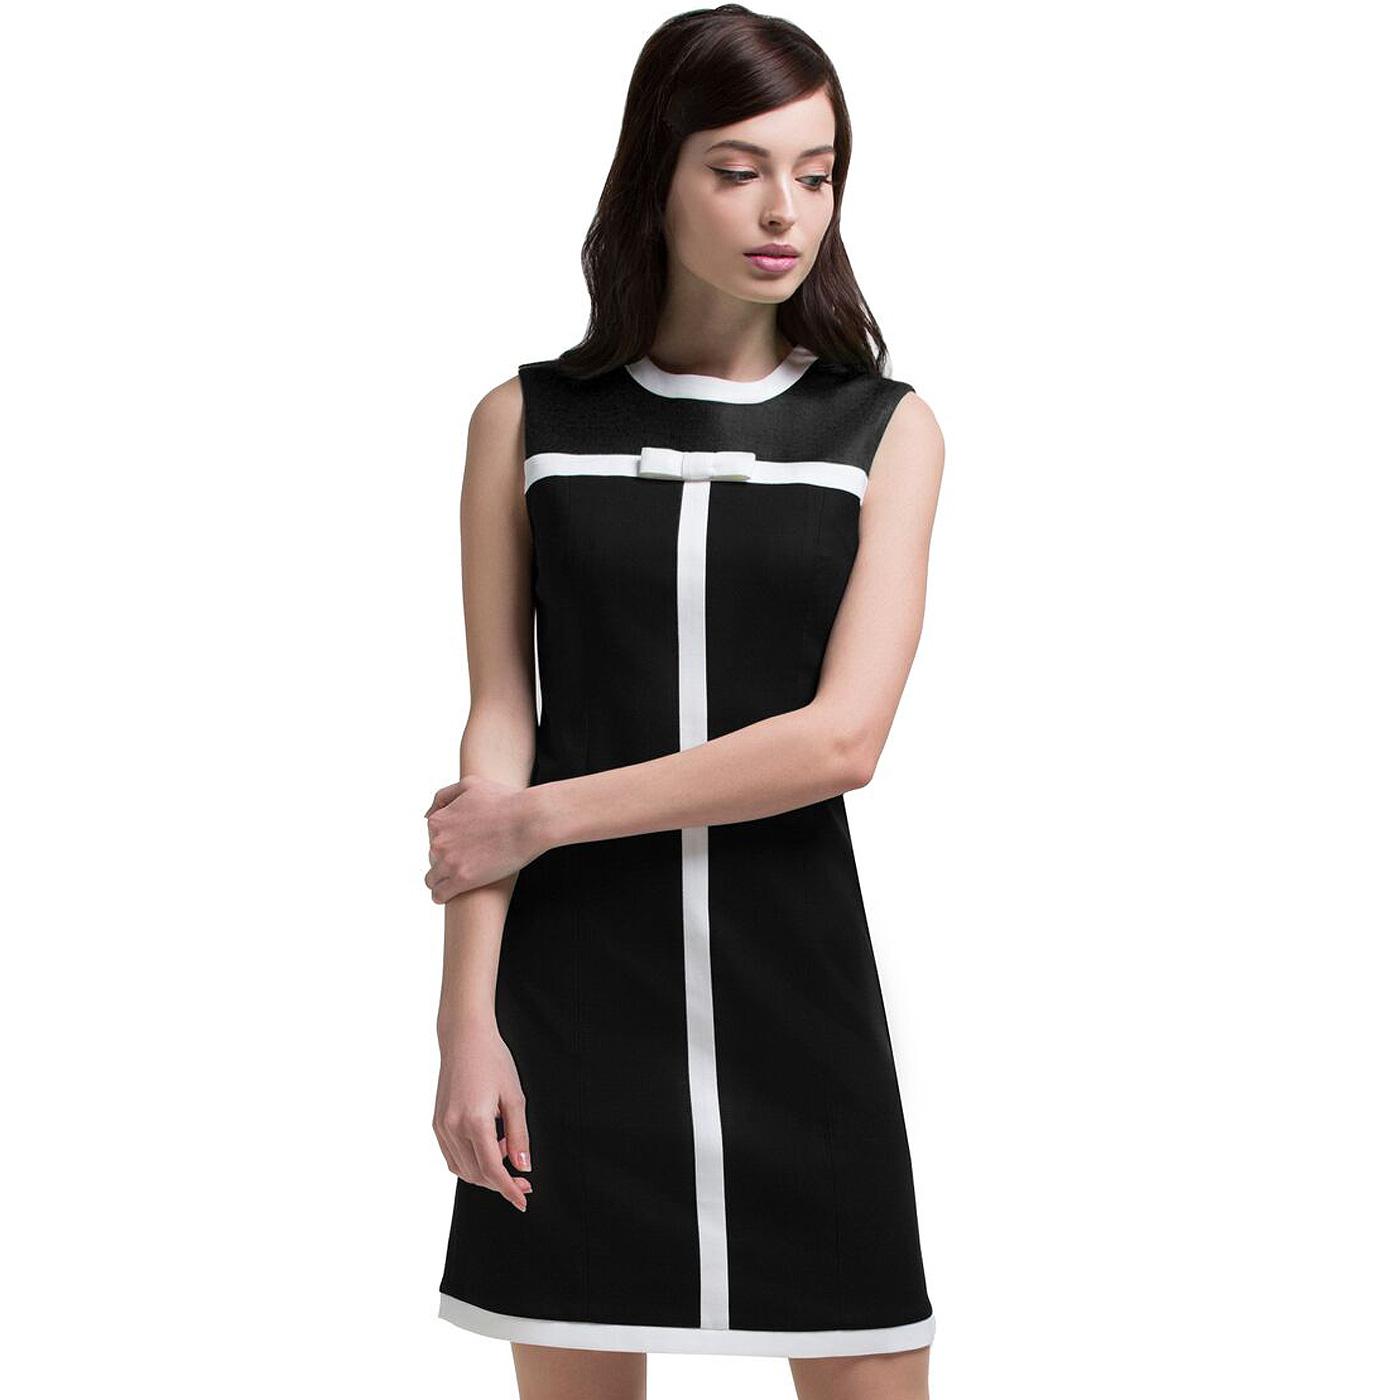 MARMALADE Retro 60s Mod Bow Front Dress in Black